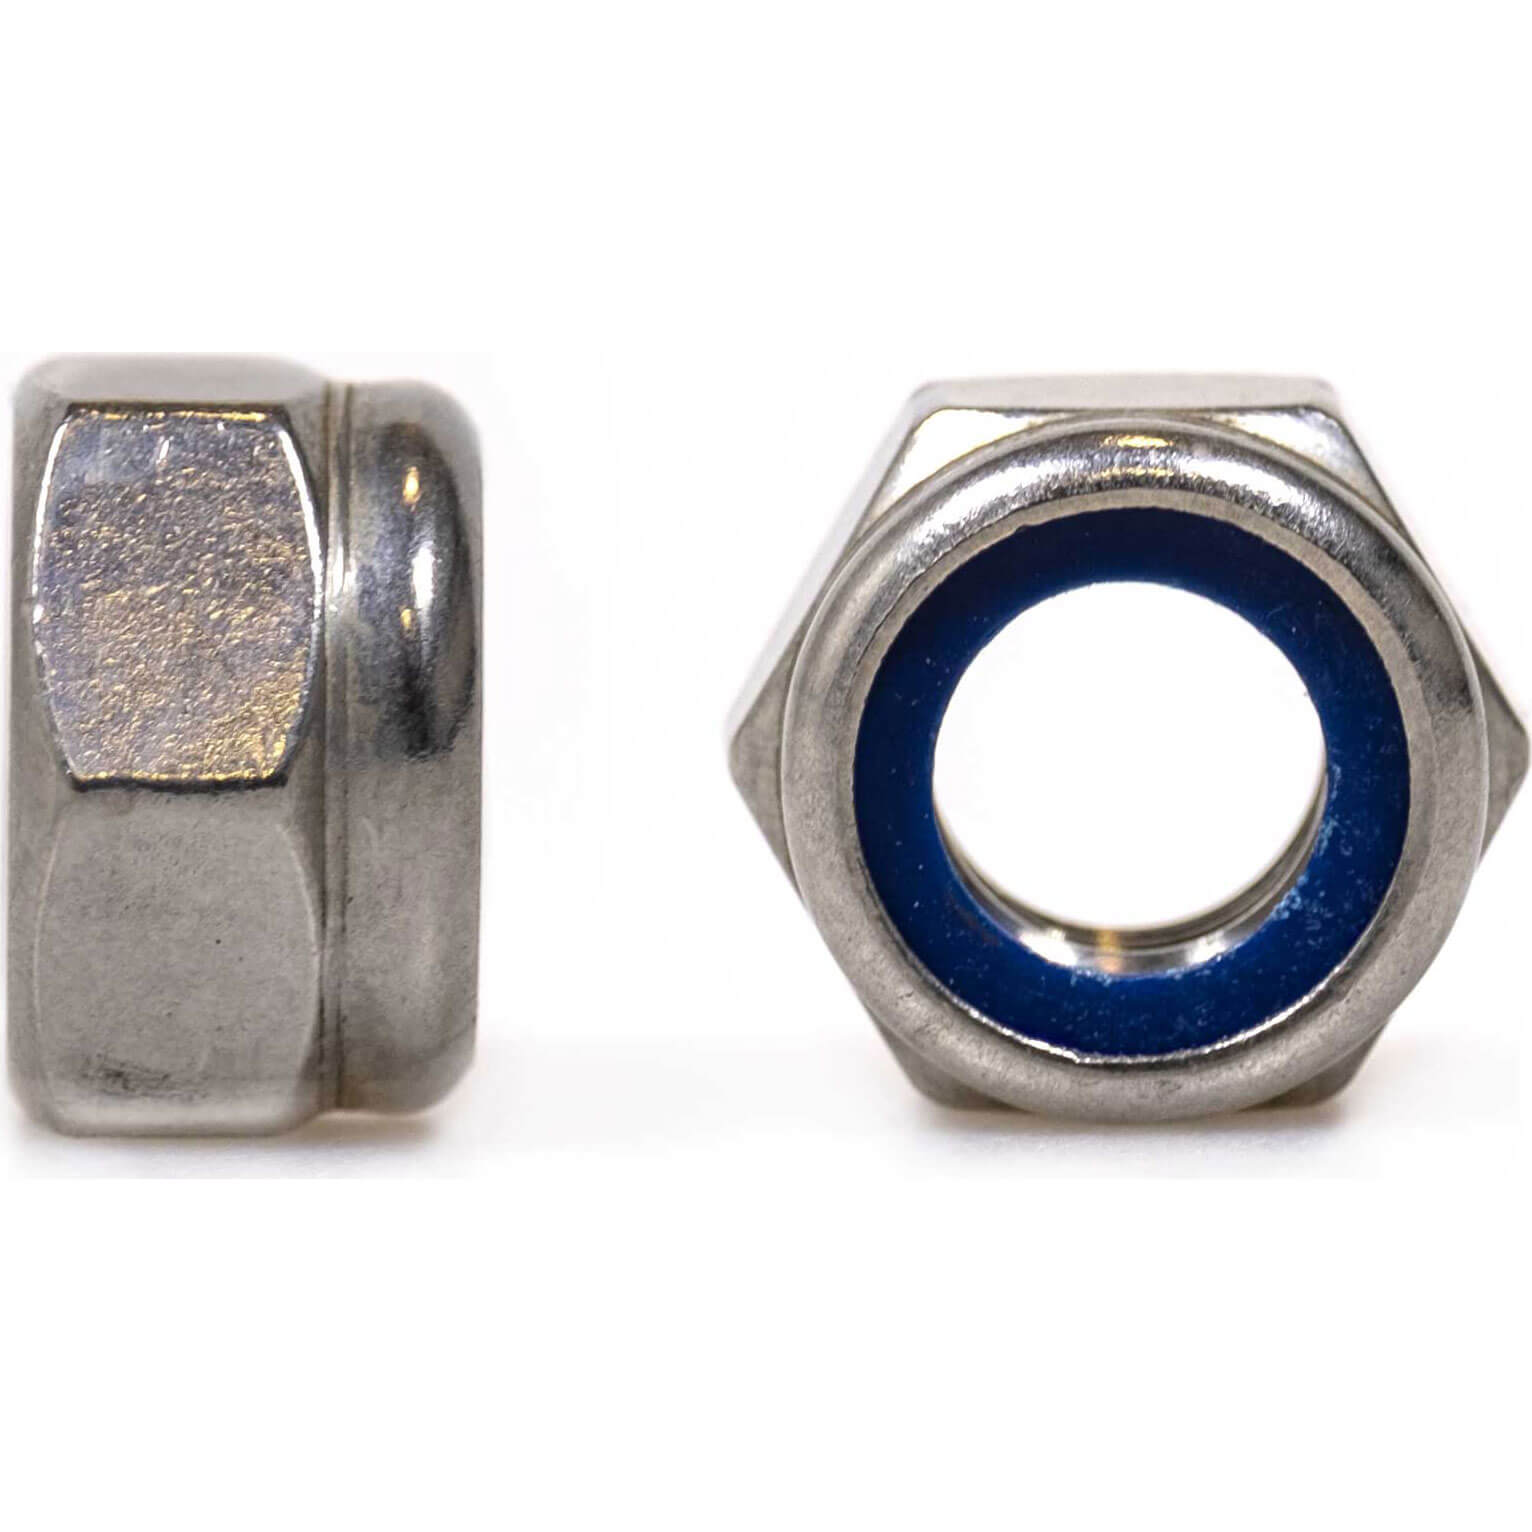 Image of Sirius A2 304 Stainless Steel Hexagon Lock Nuts M3